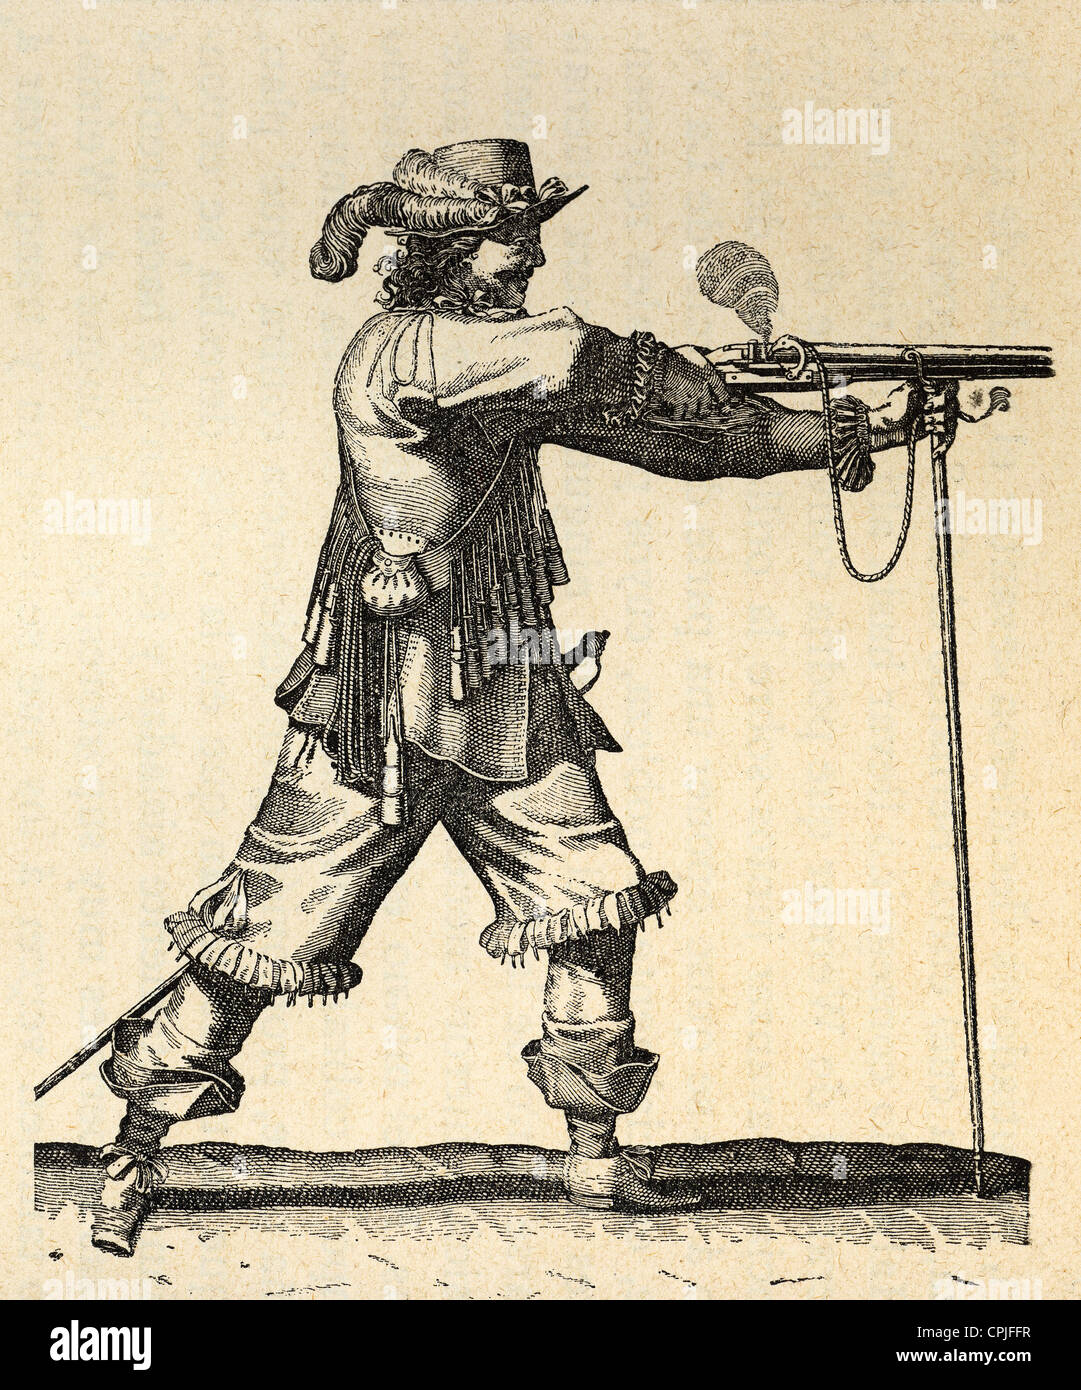 Army of the 18th century. France. Musketeer of the Infantry of Louis XIV firing the musket. Engraving. Stock Photo